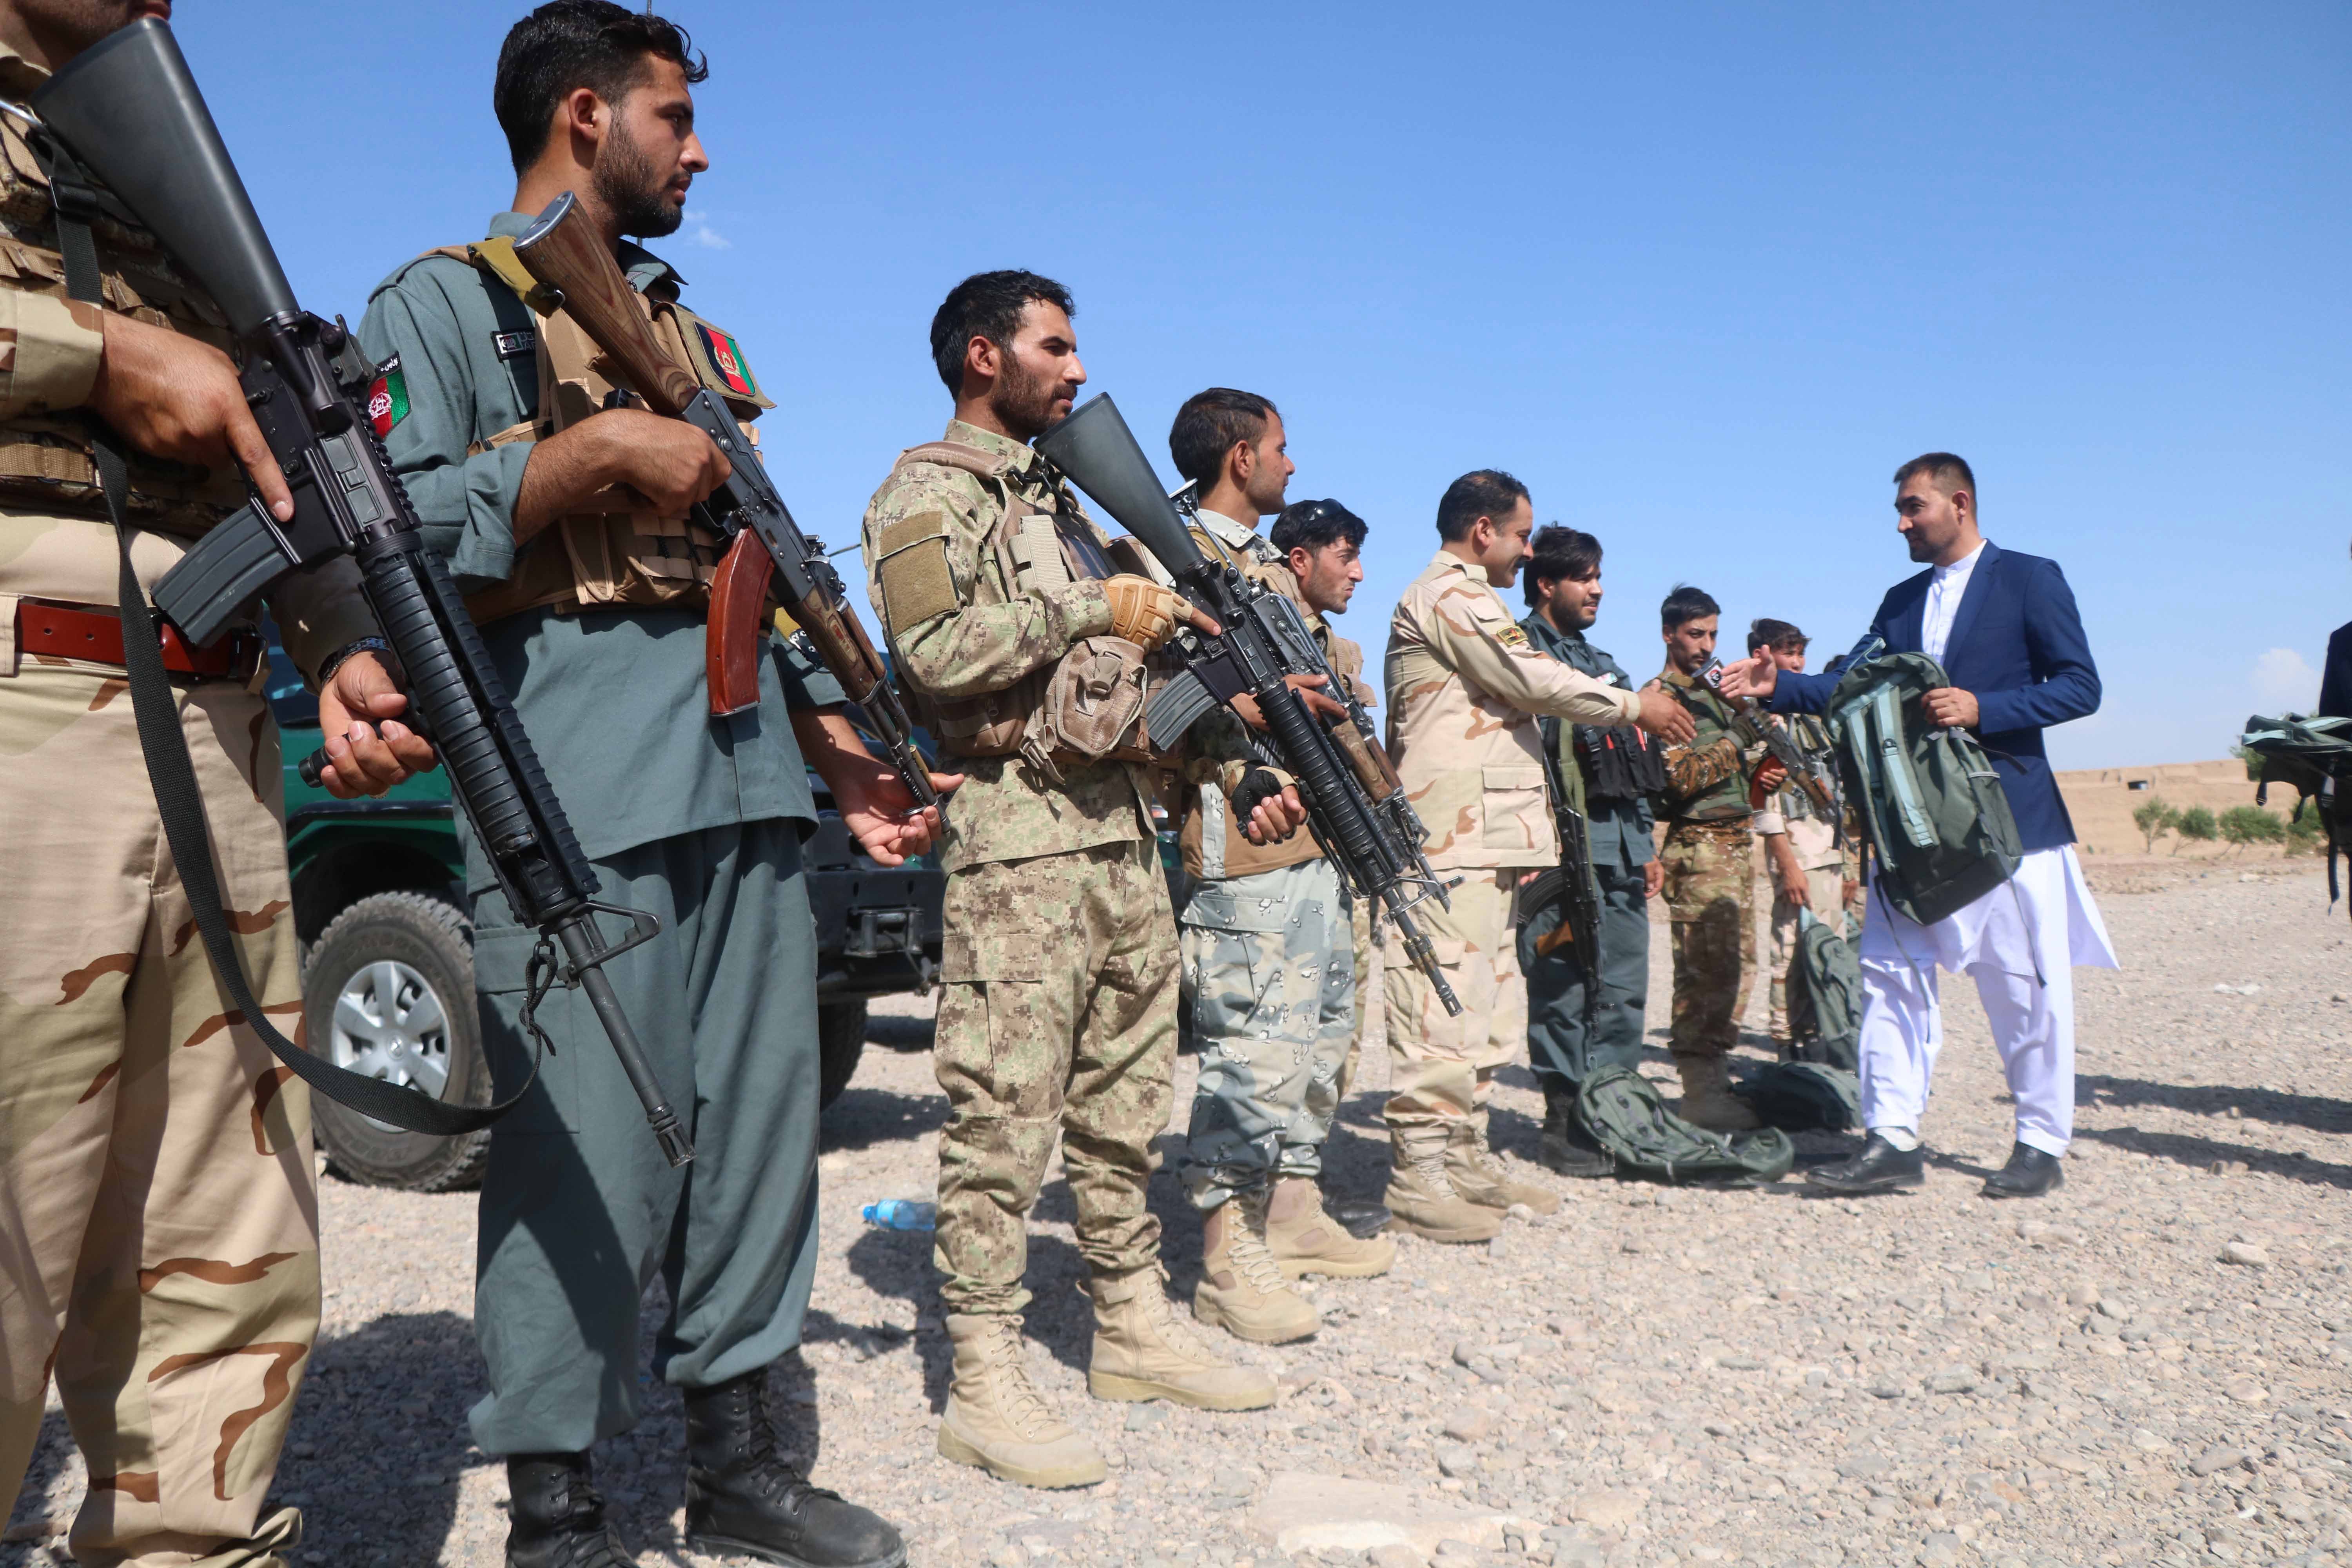 Afghan security officials stand guard against the Taliban during a ceremony in Herat, near Badghis province